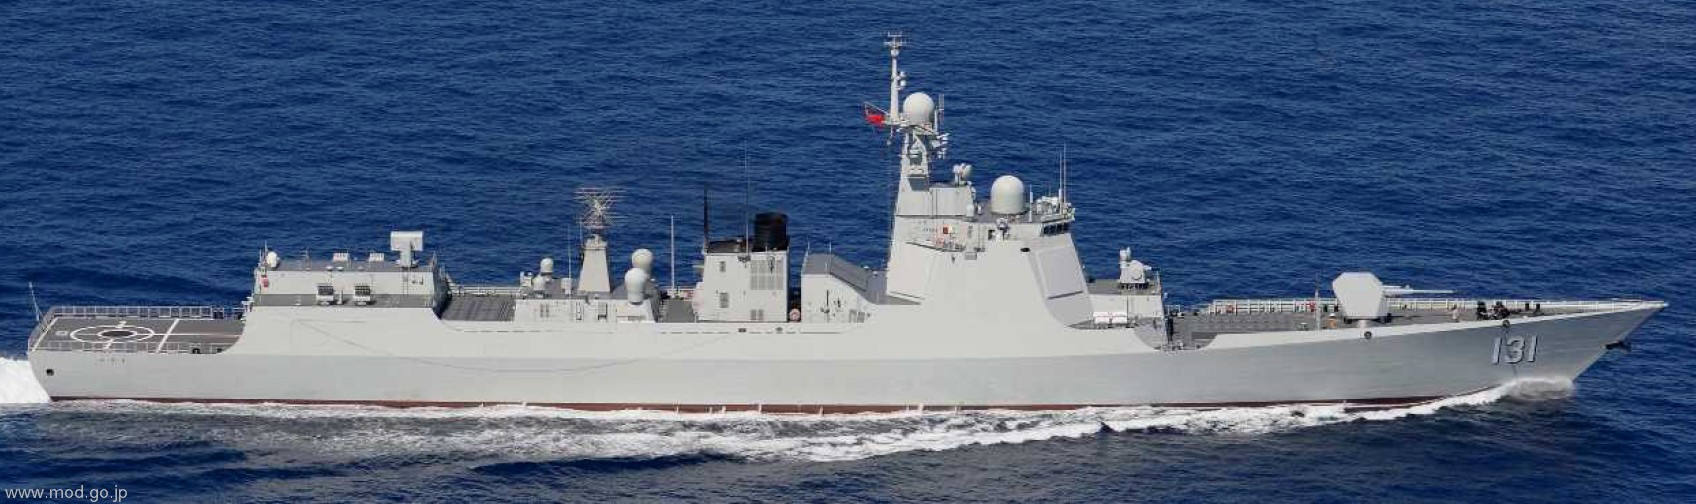 ddg-131 plans taiyuan type 052d luyang class guided missile destroyer ddg china people's liberation army navy 02